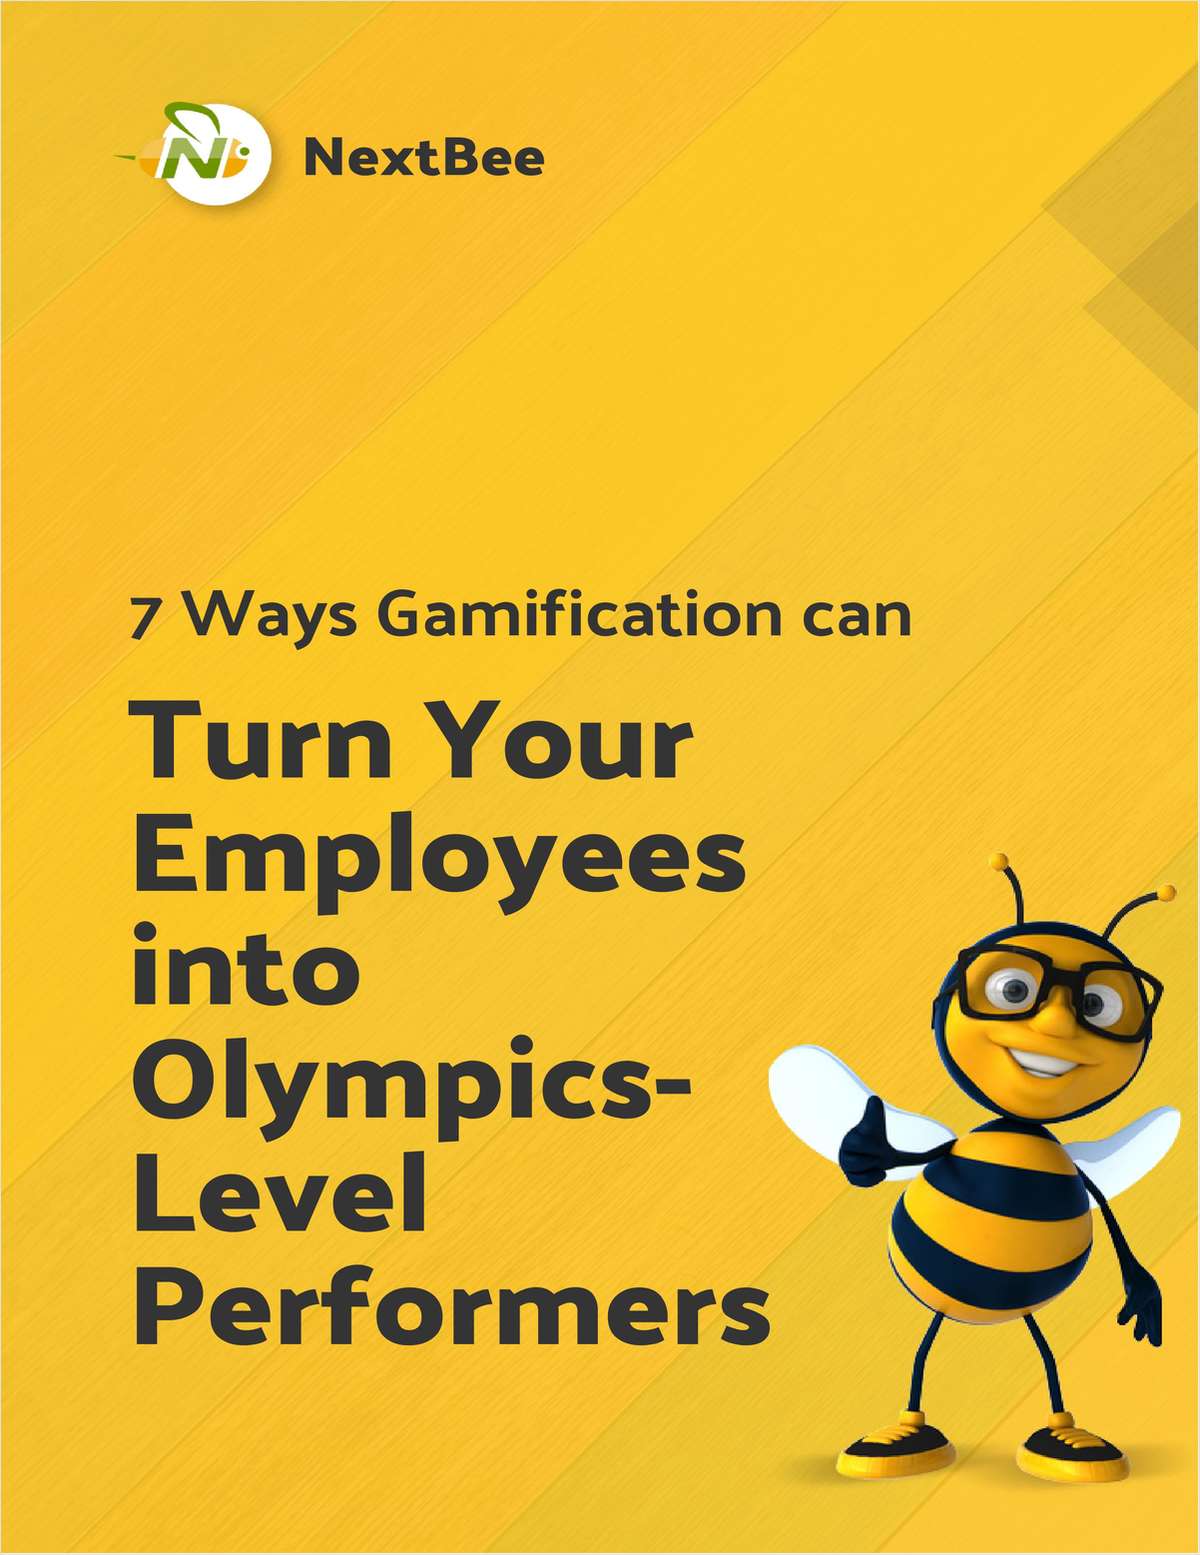 7 Ways Gamification Can Turn Employees into Olympics-Level Performers